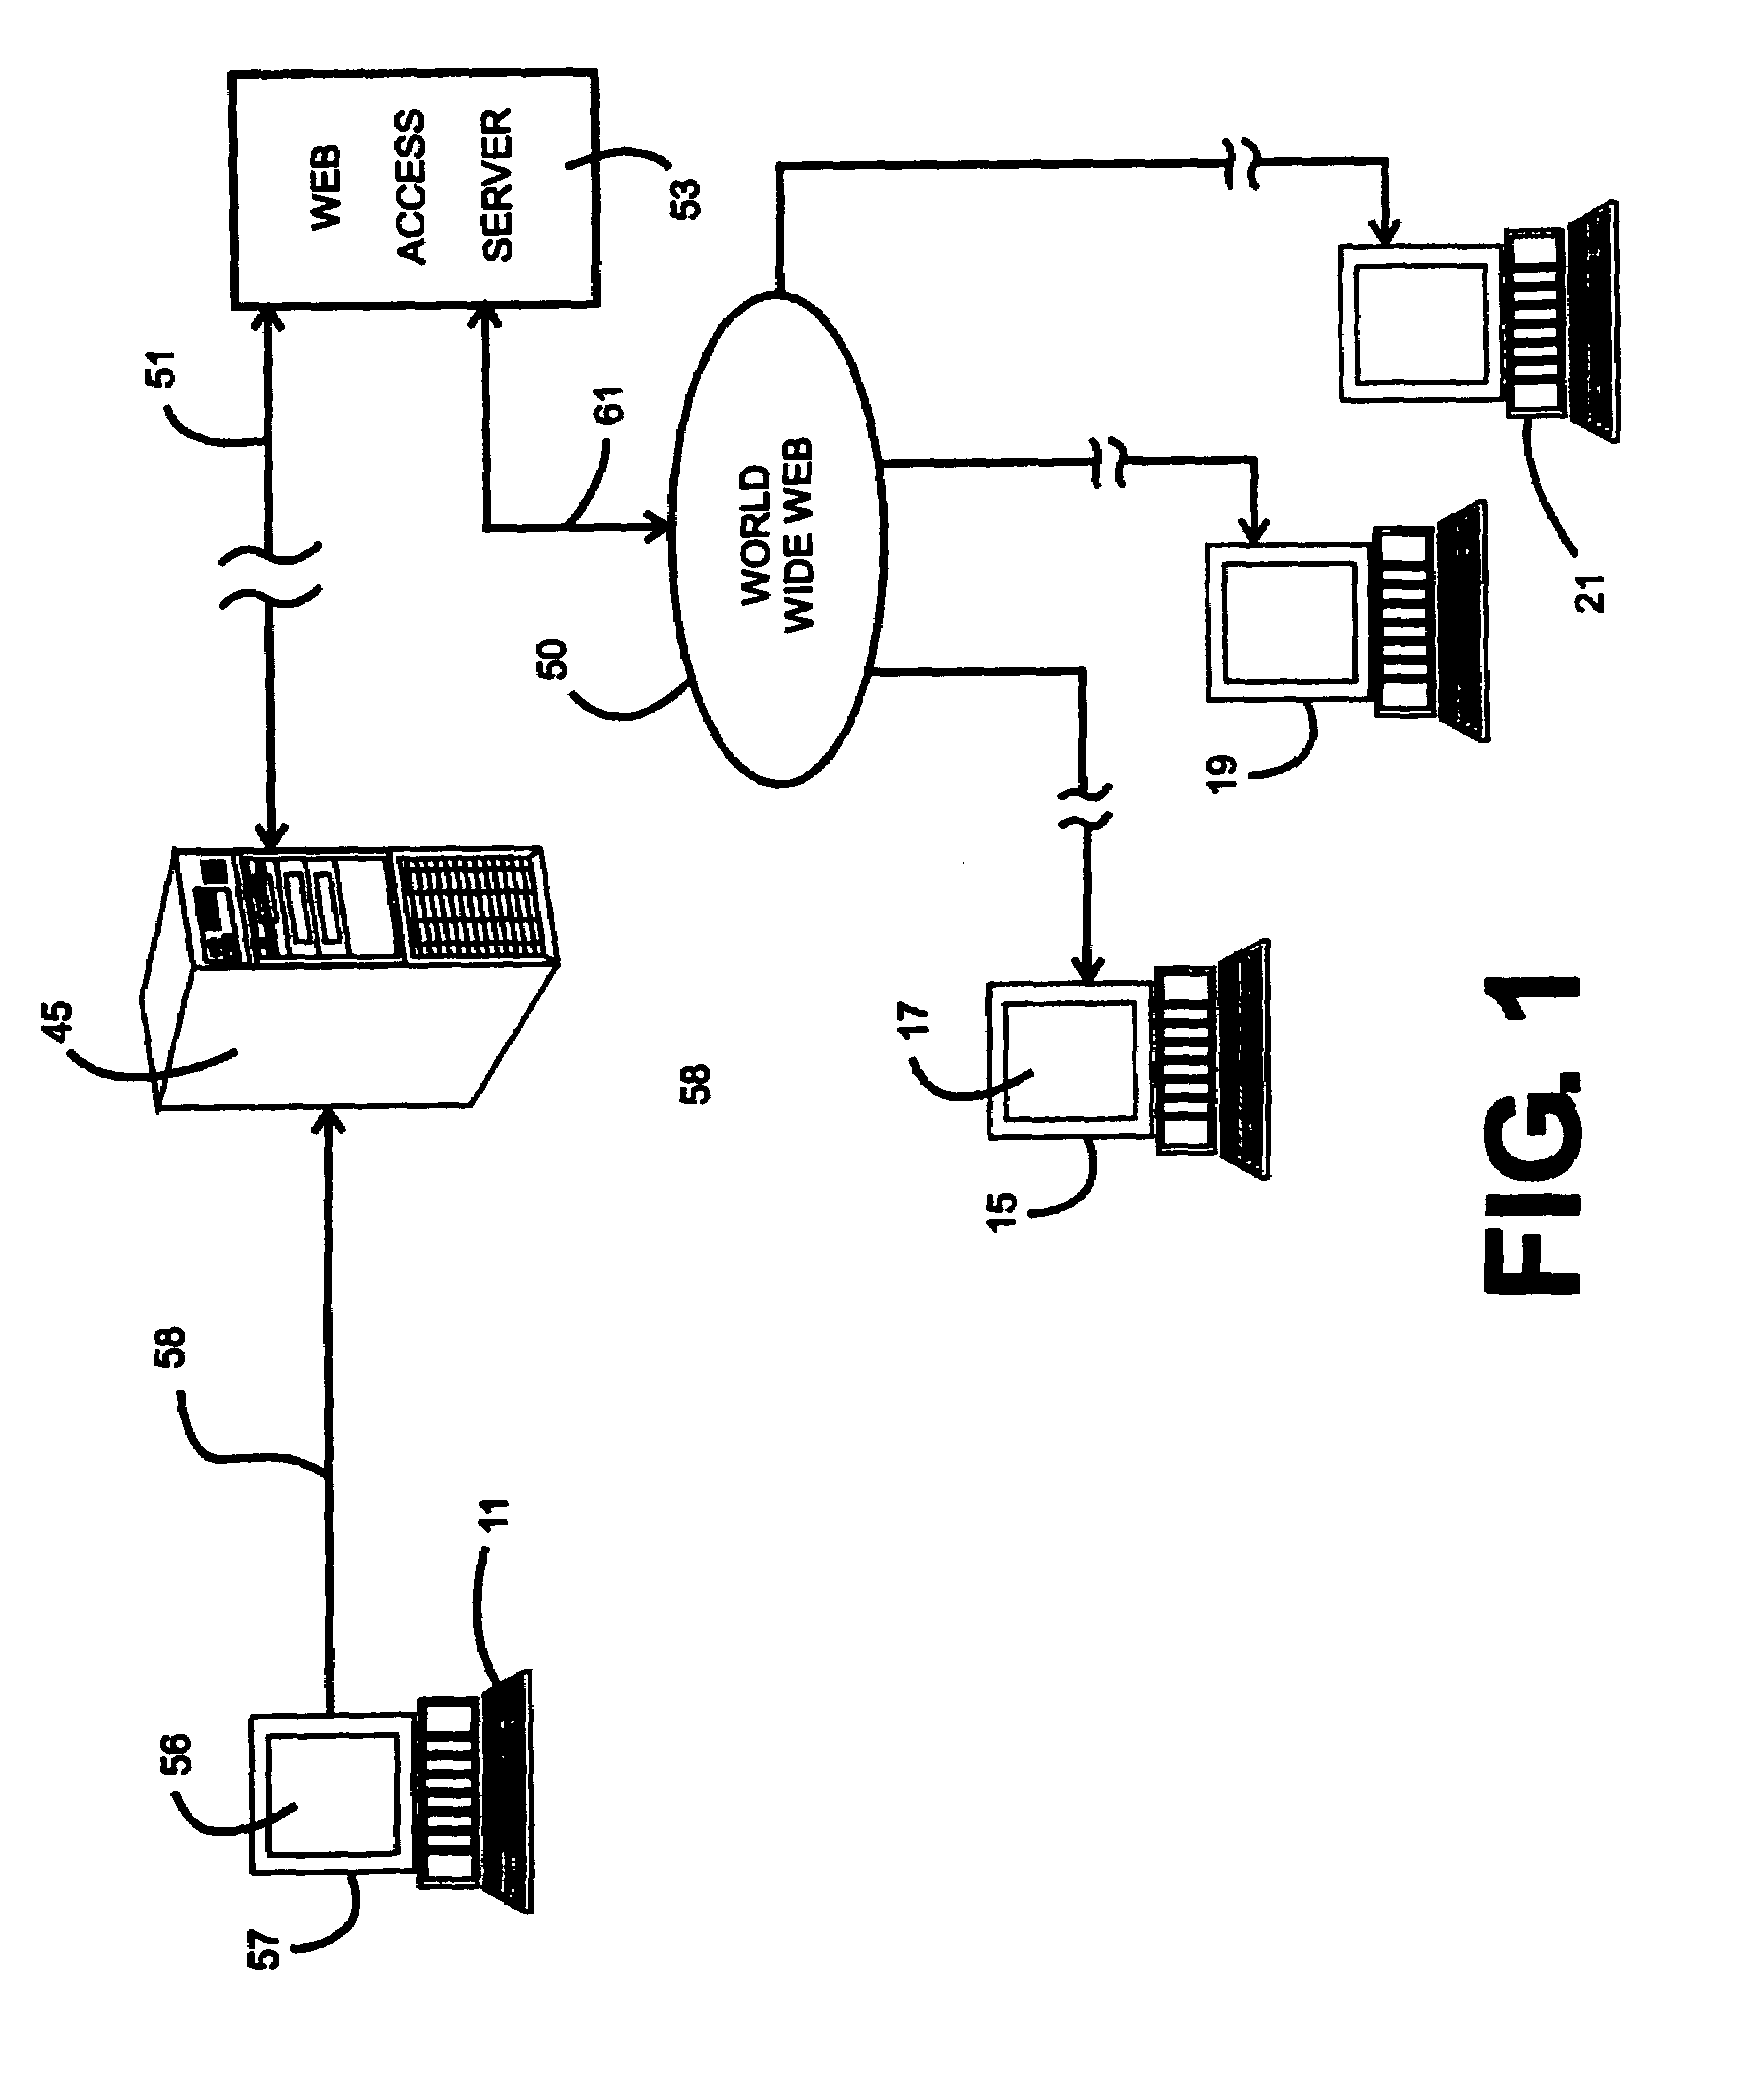 Method and system for creating banking sub-accounts with varying limits